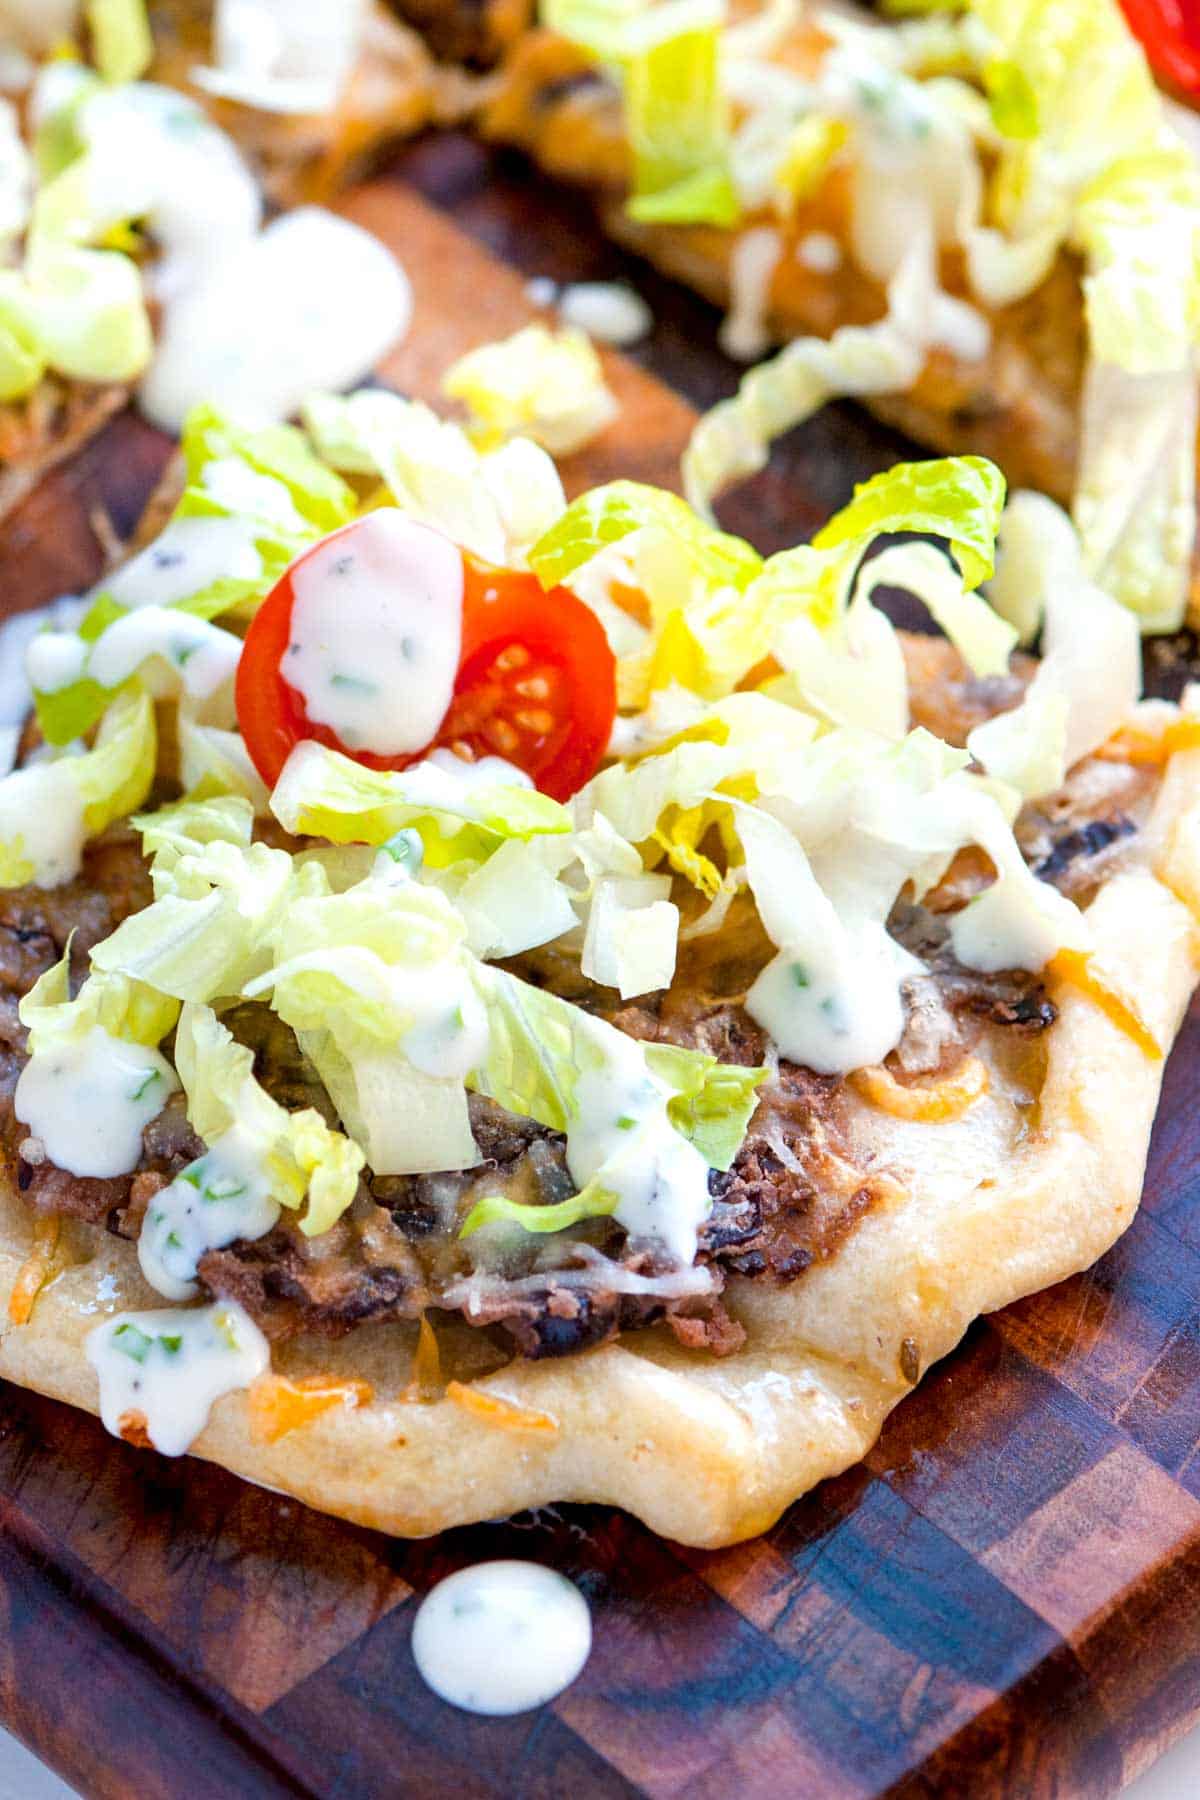 Easy Black Bean Pizza Topped with Salad